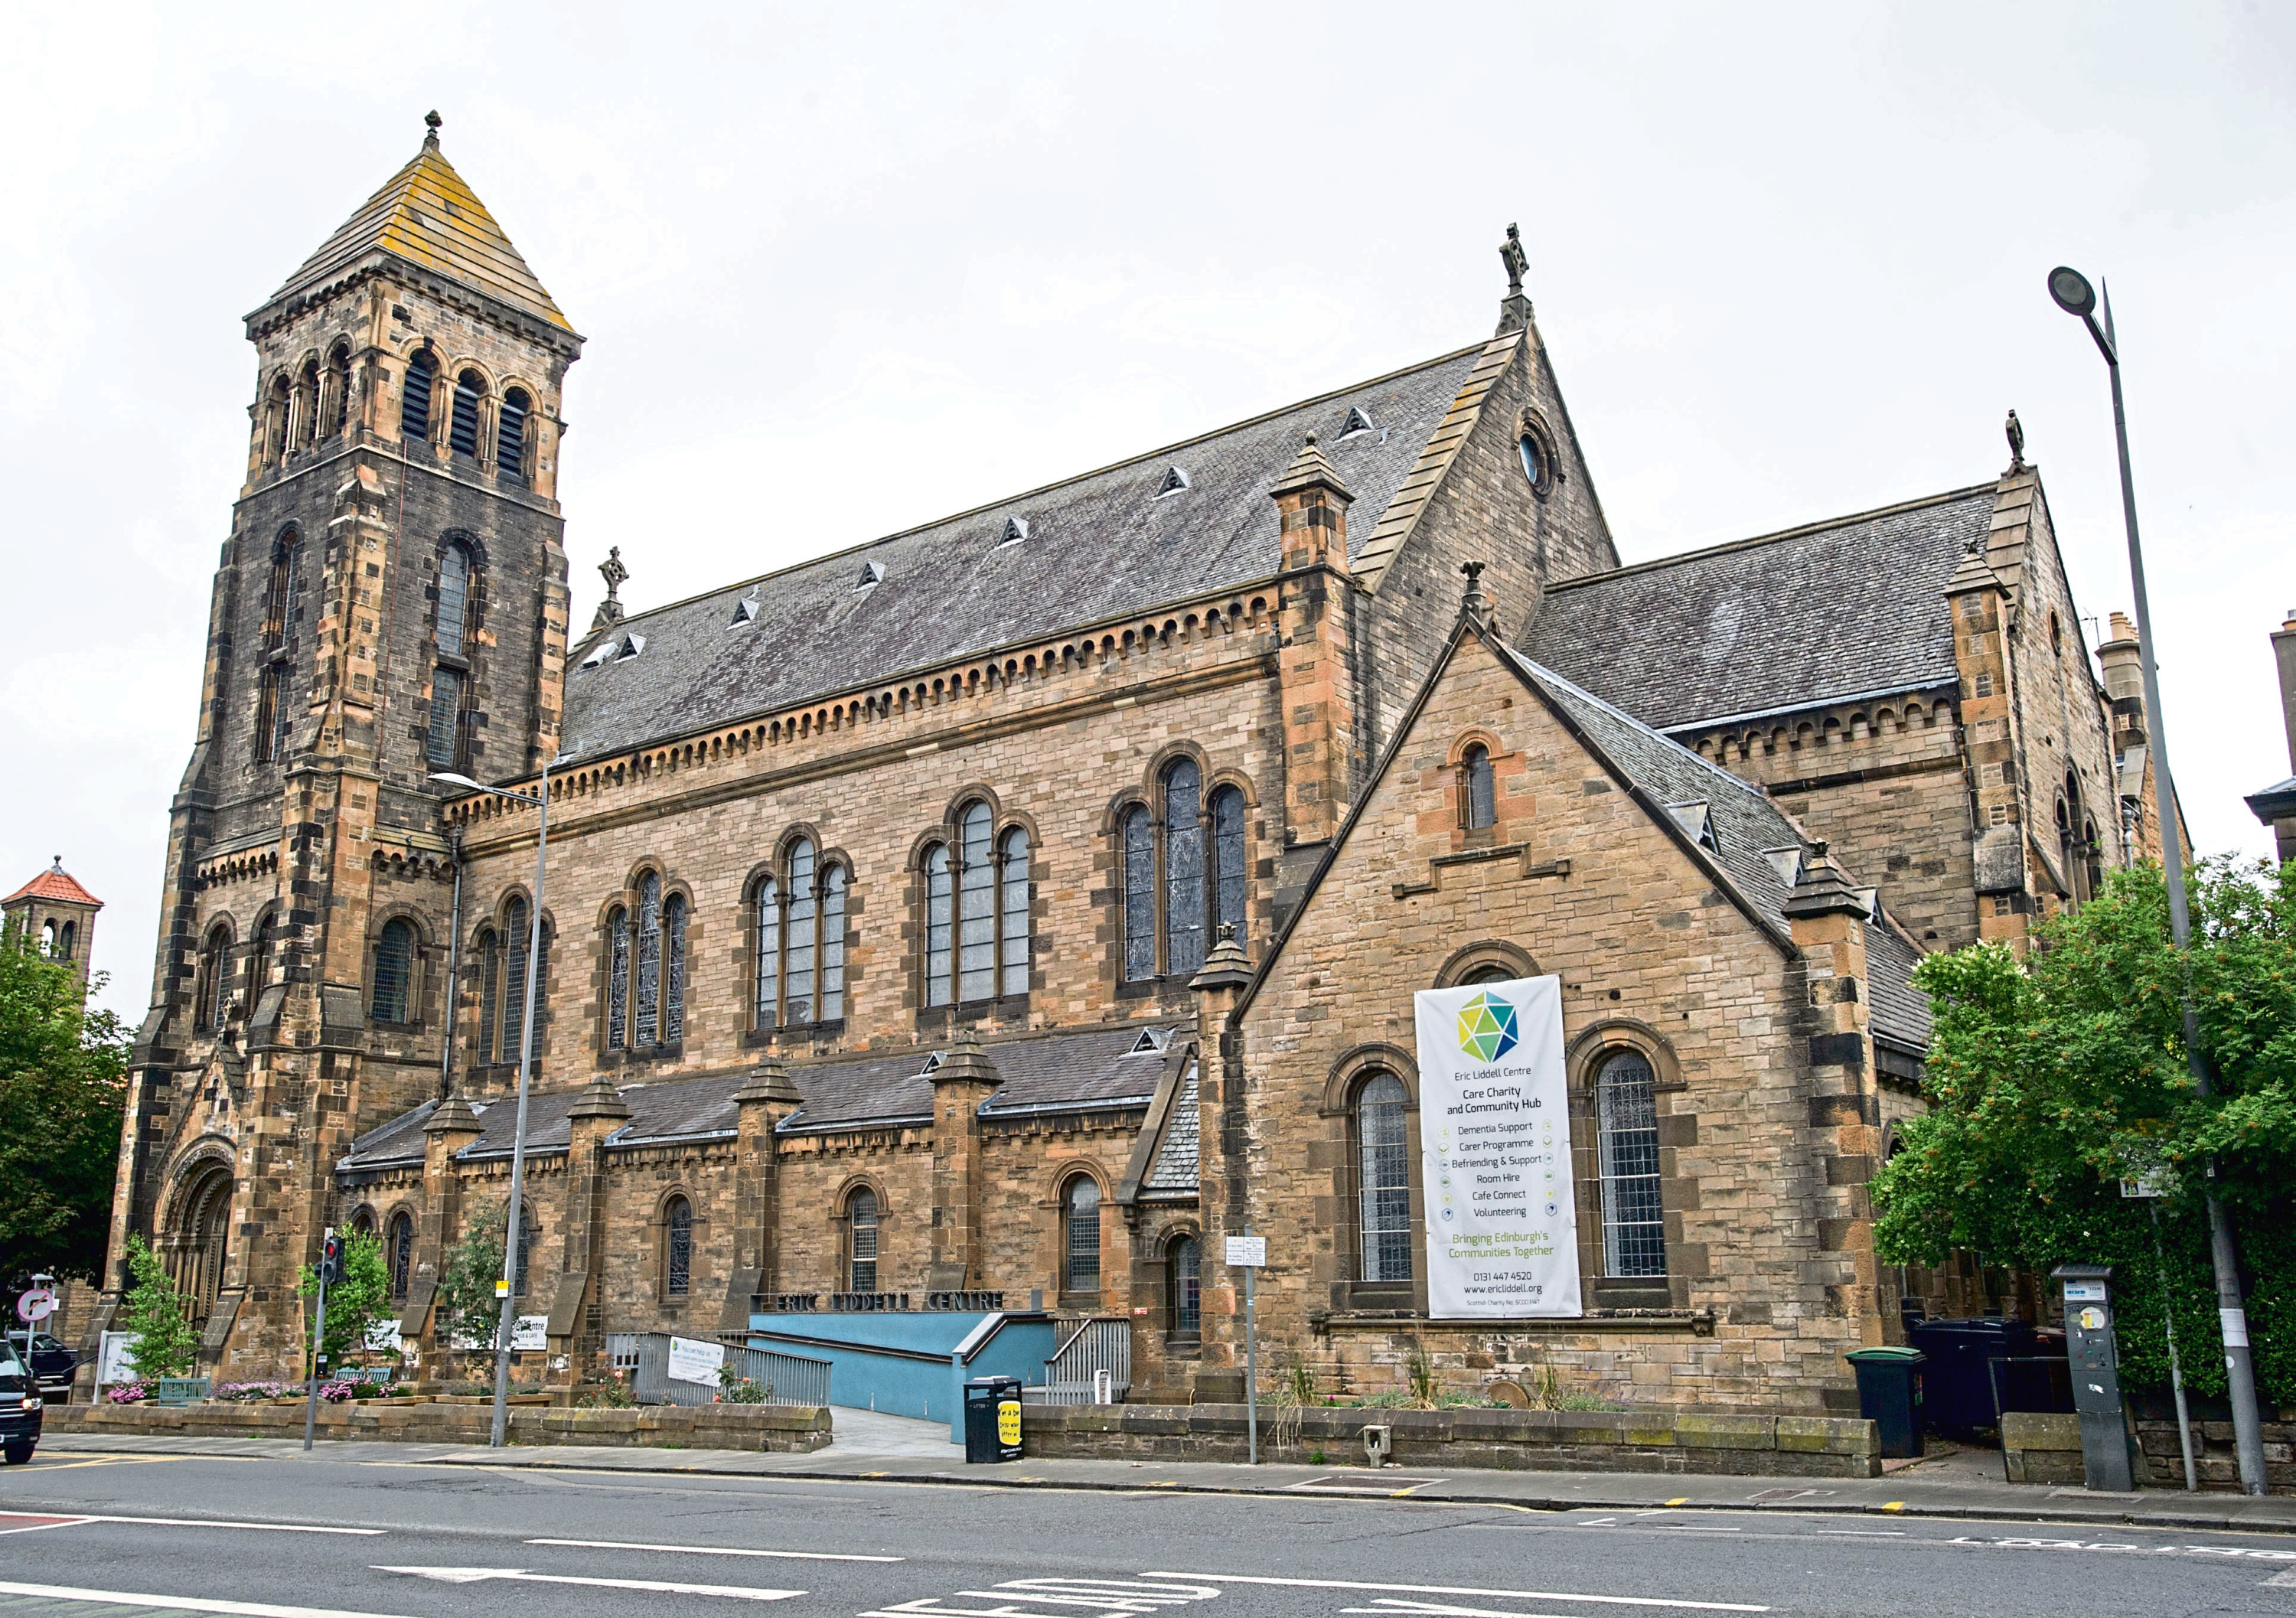 The service operates out of the Eric Liddell centre in Edinburgh